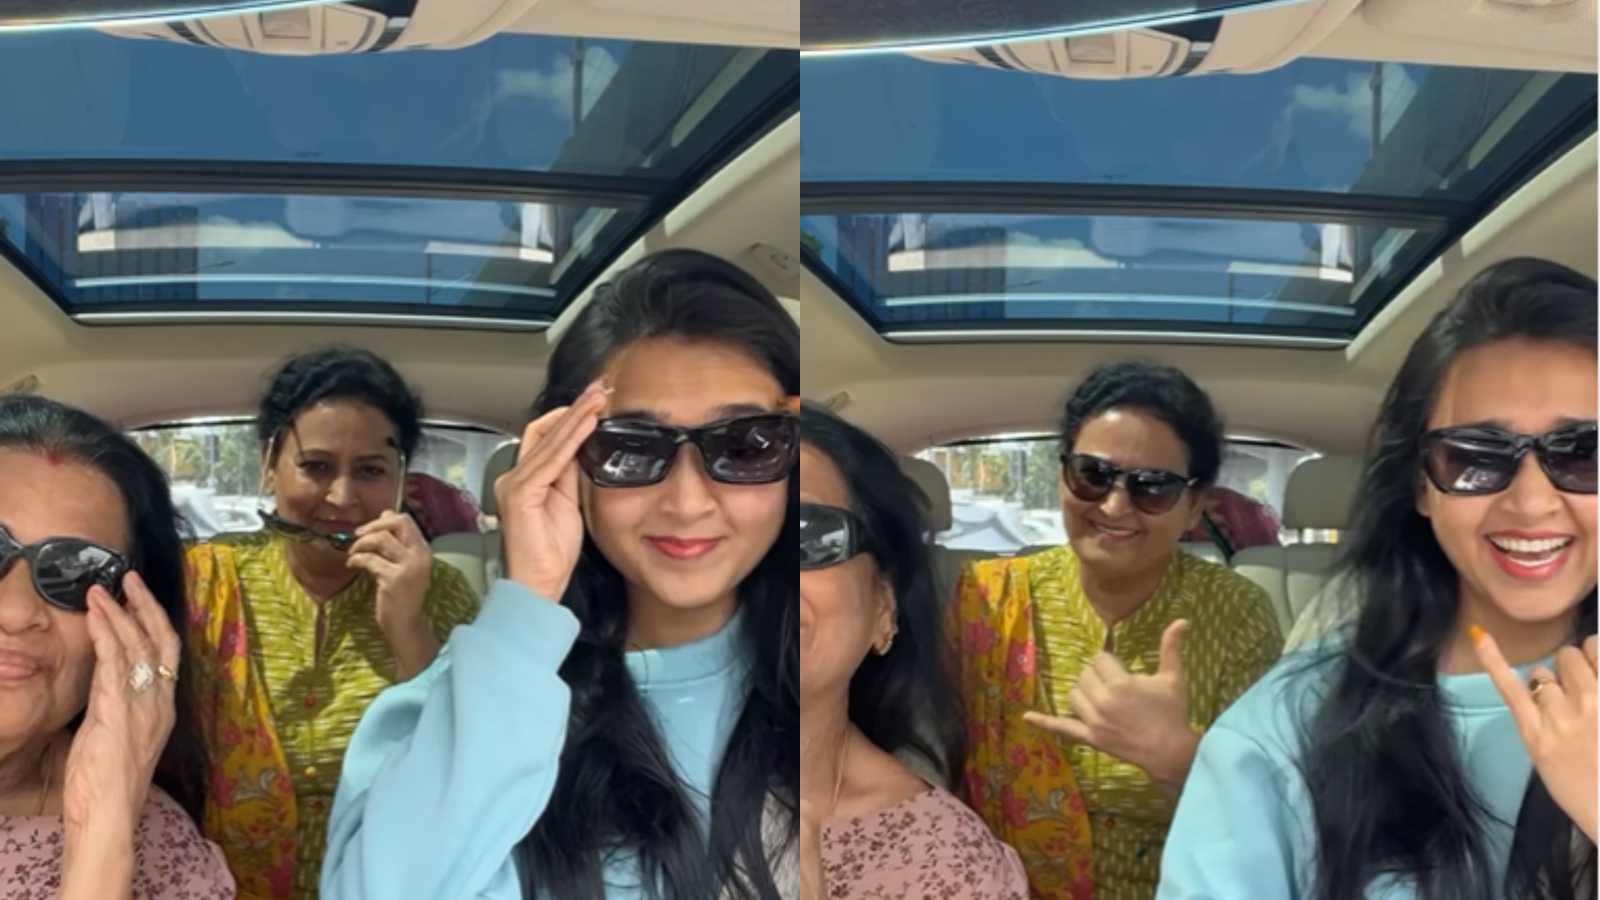 Tejasswi Prakash drops a 'dope' reel with Karan Kundrra's mom and her own, he reacts: 'One day I leave you with the mothers ...'